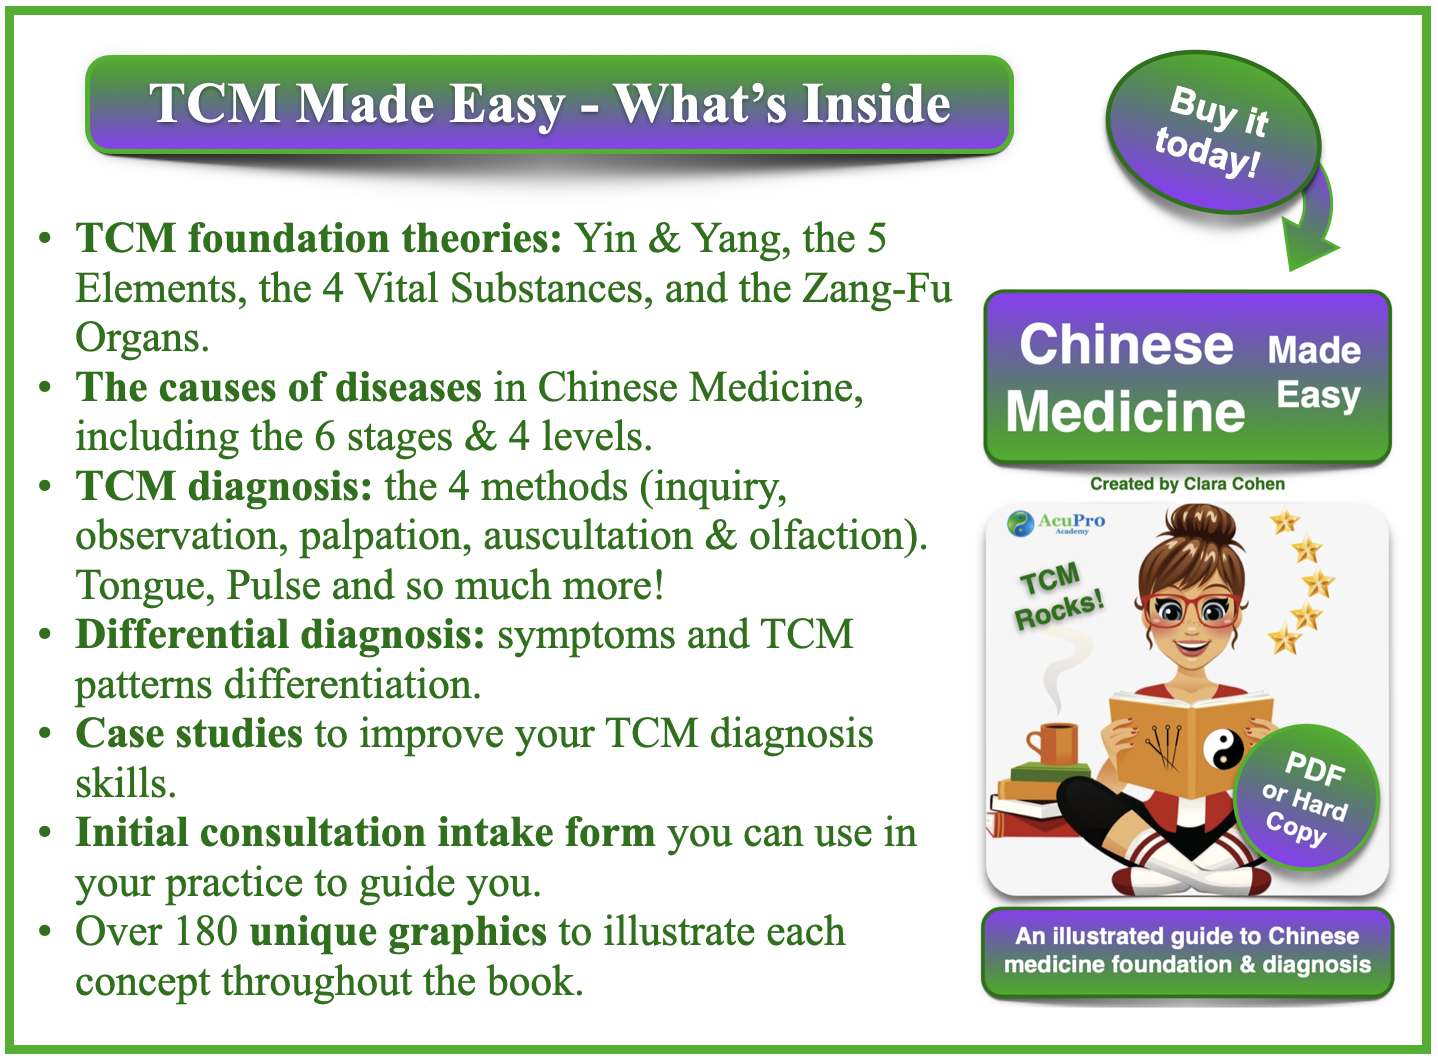 Chinese medicine made easy book